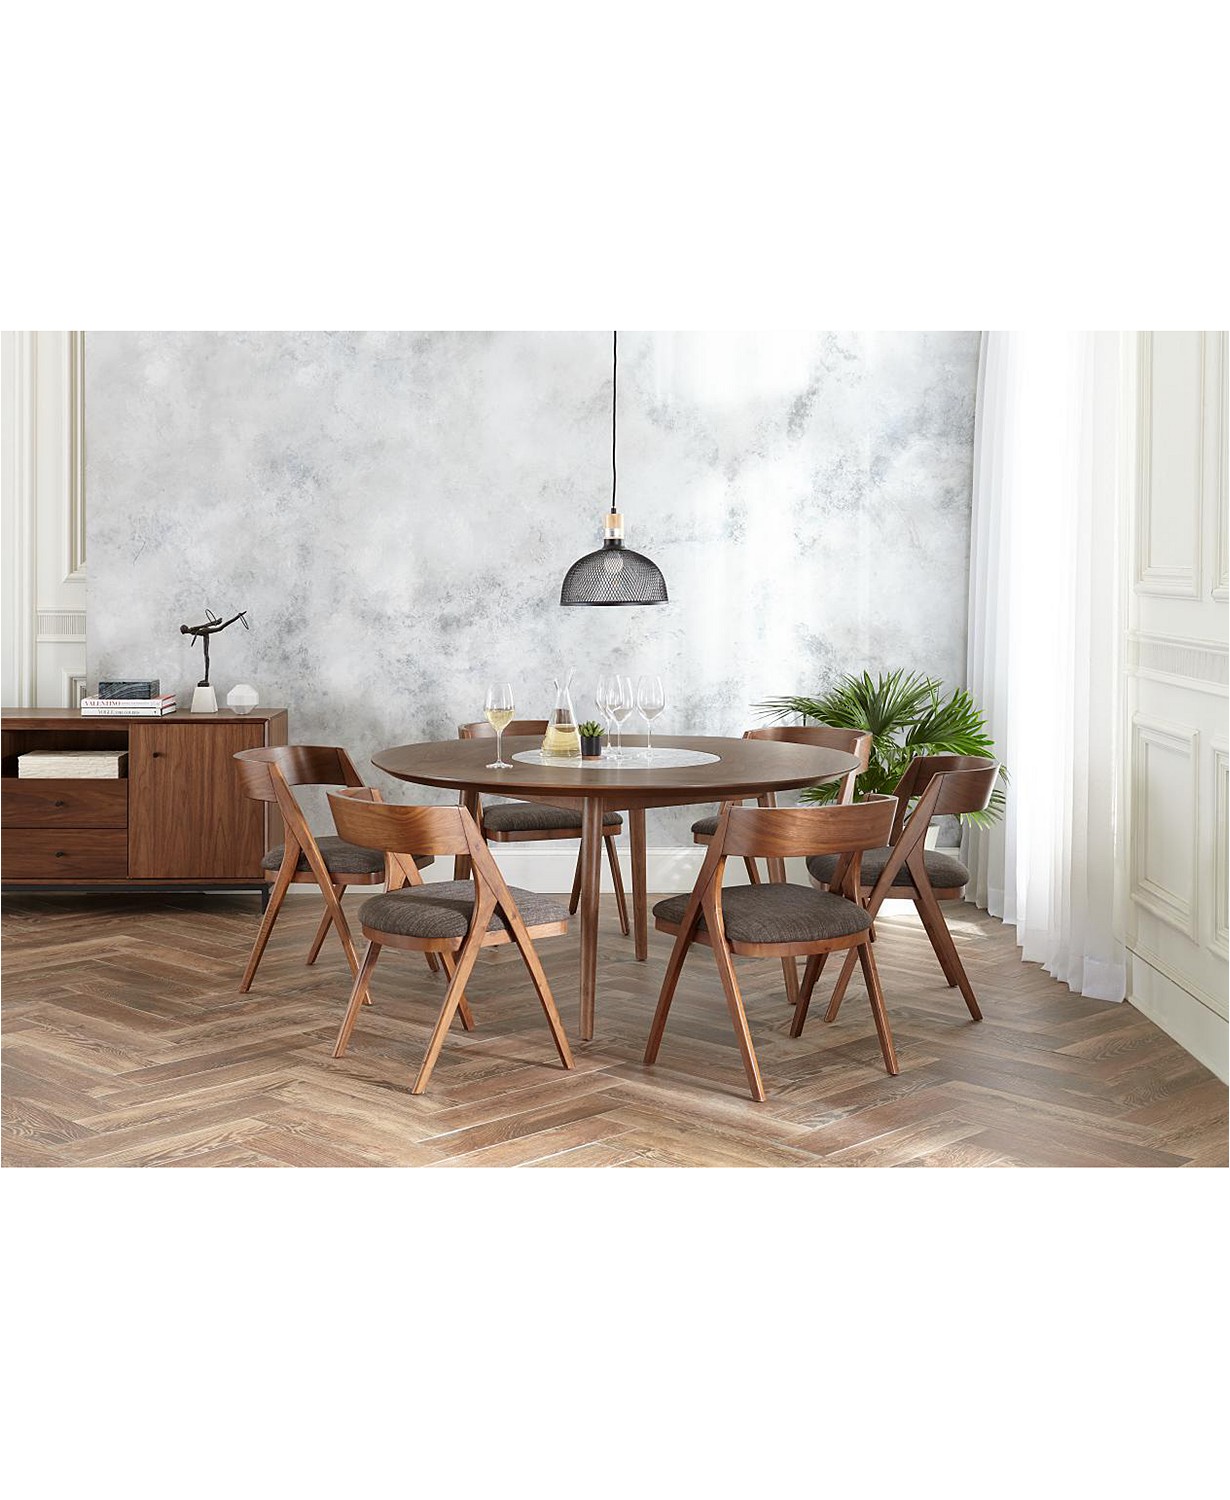 Oslo Dining Furniture, 7-Pc. Set (Lazy Susan Table & 6 Side Chairs)